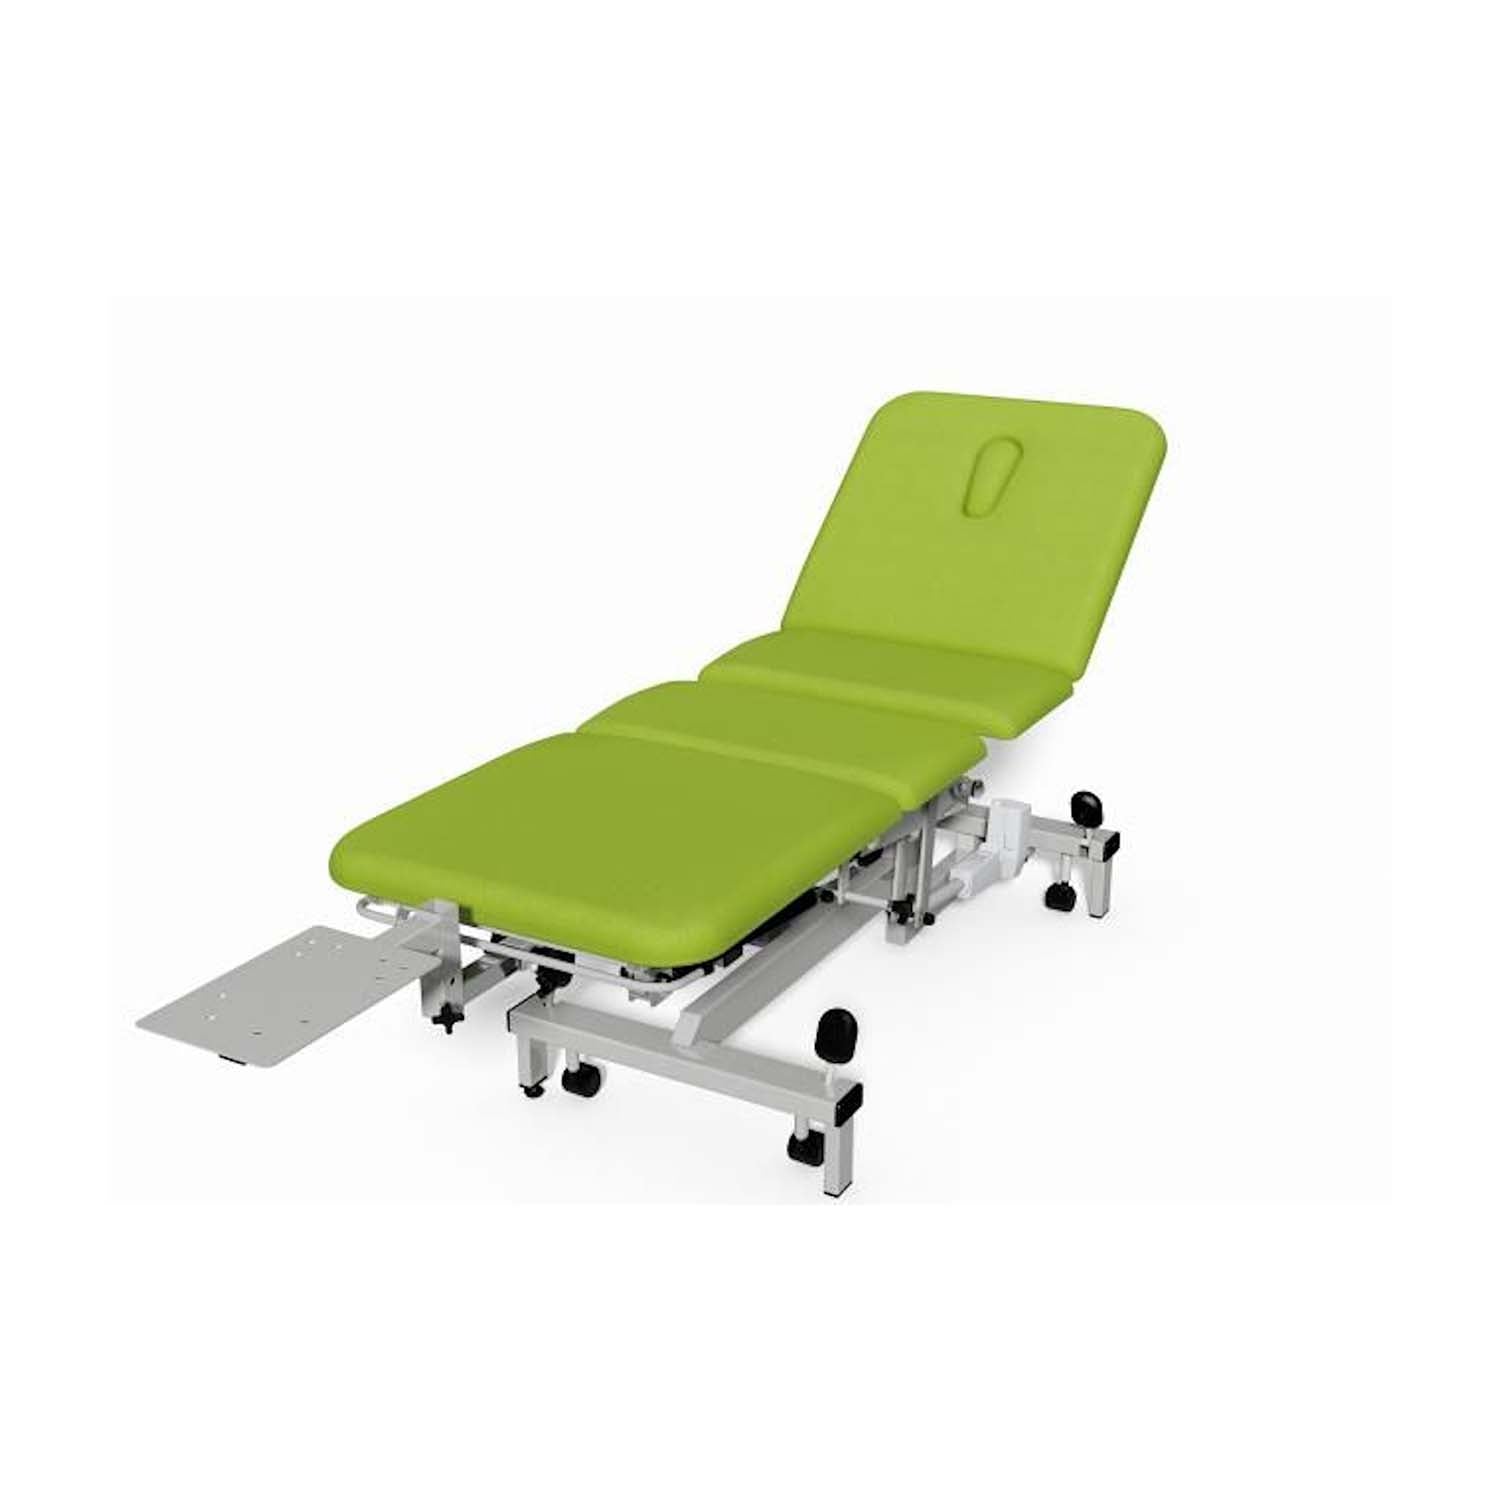 Plinth 2000 Model 502T Traction Table | Hydraulic | Citrus Green